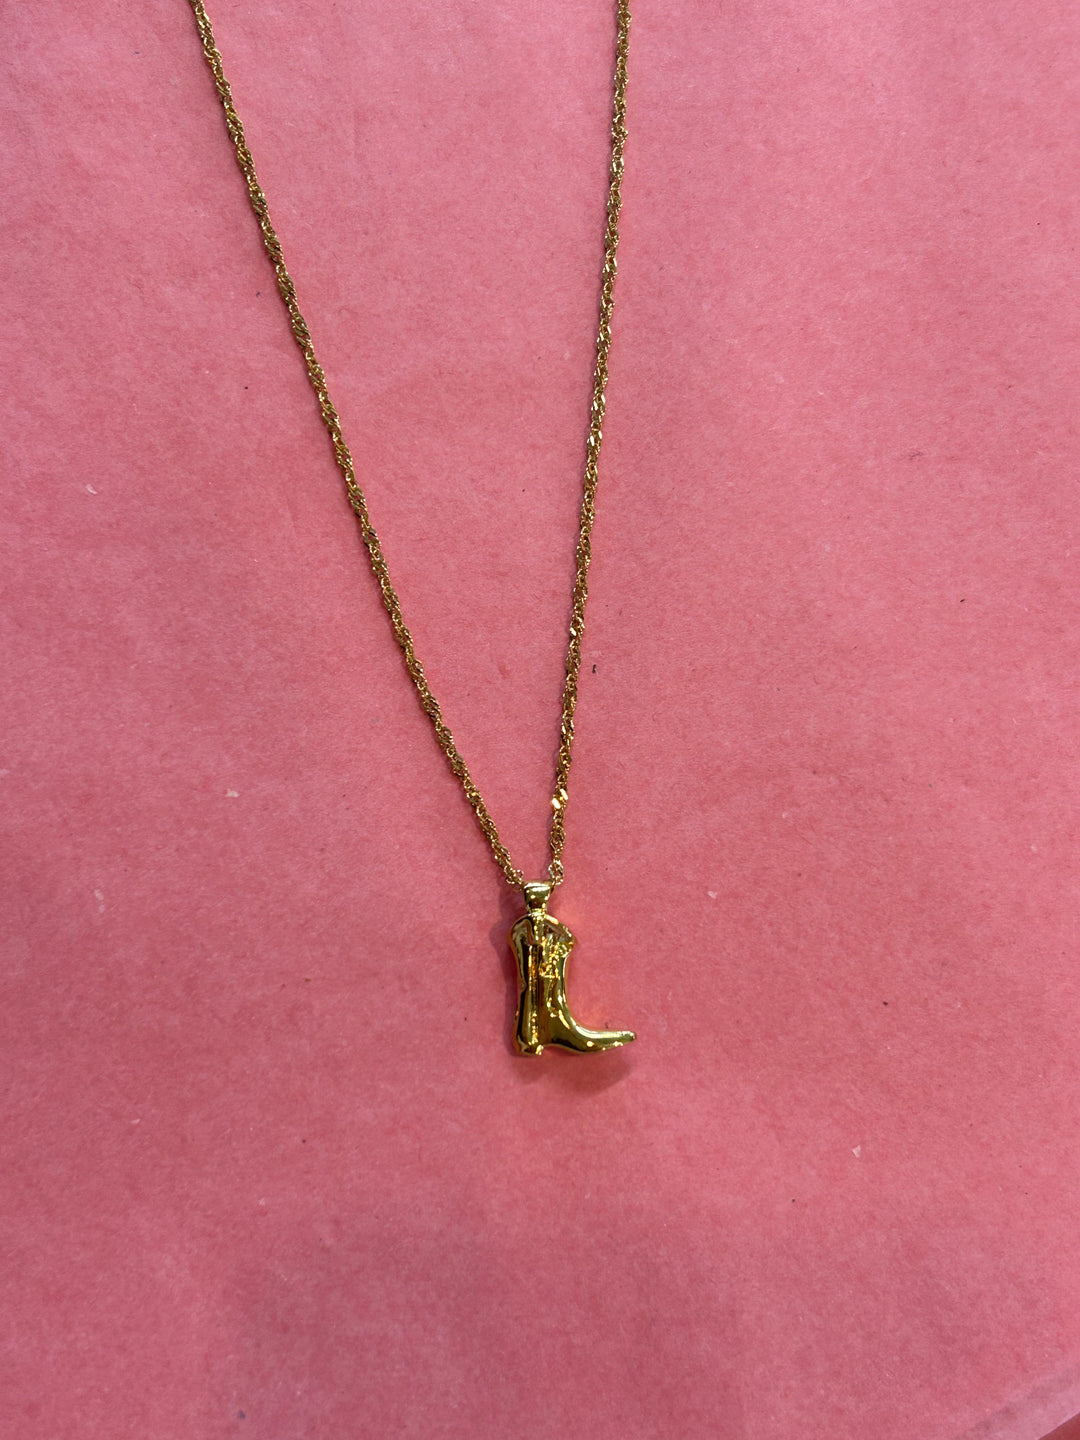 Cowboy Boot Necklace in Gold